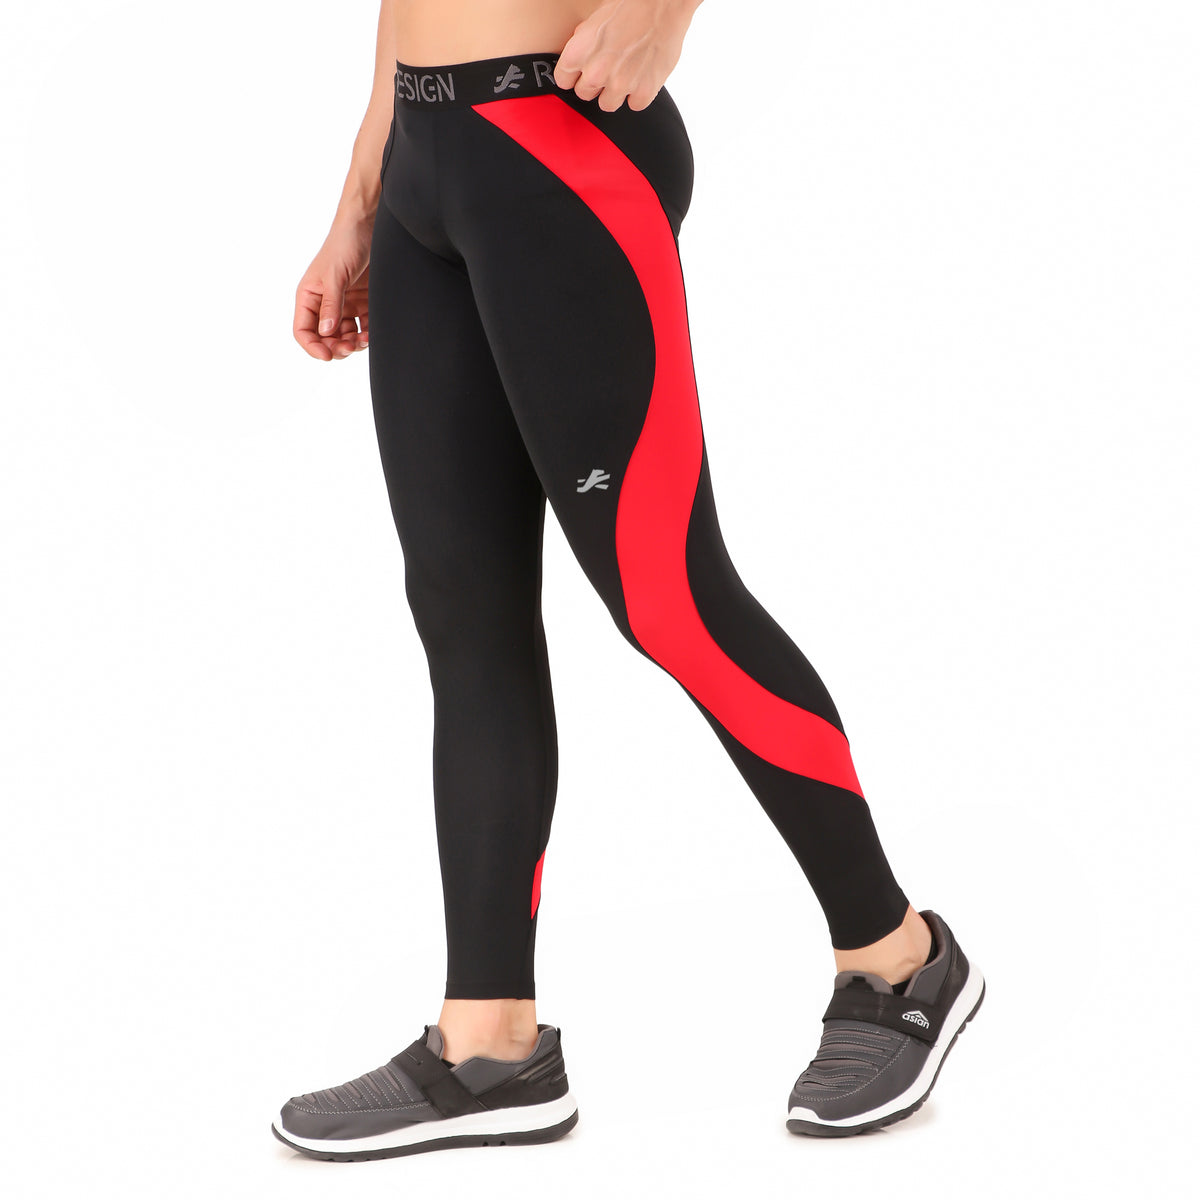 Just rider 34 Leggings for Men Quick Dry Compression Sports Capri Pants  Running Gym Tights Black S  Amazonin Clothing  Accessories